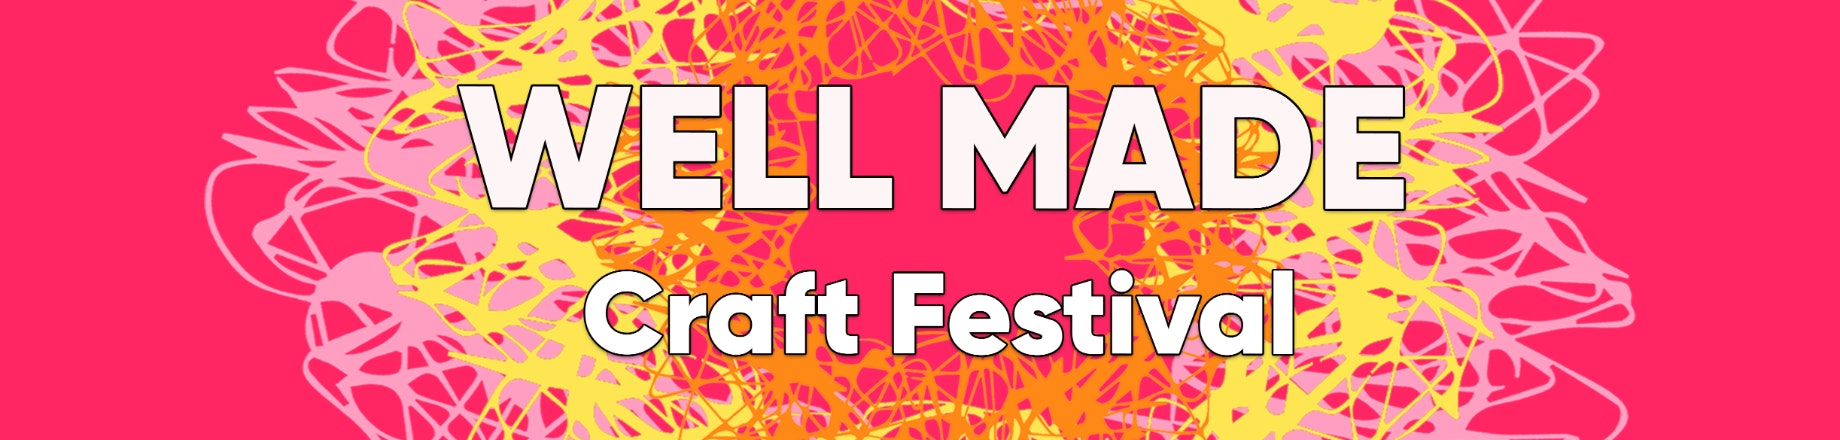 Well-Made Craft Festival